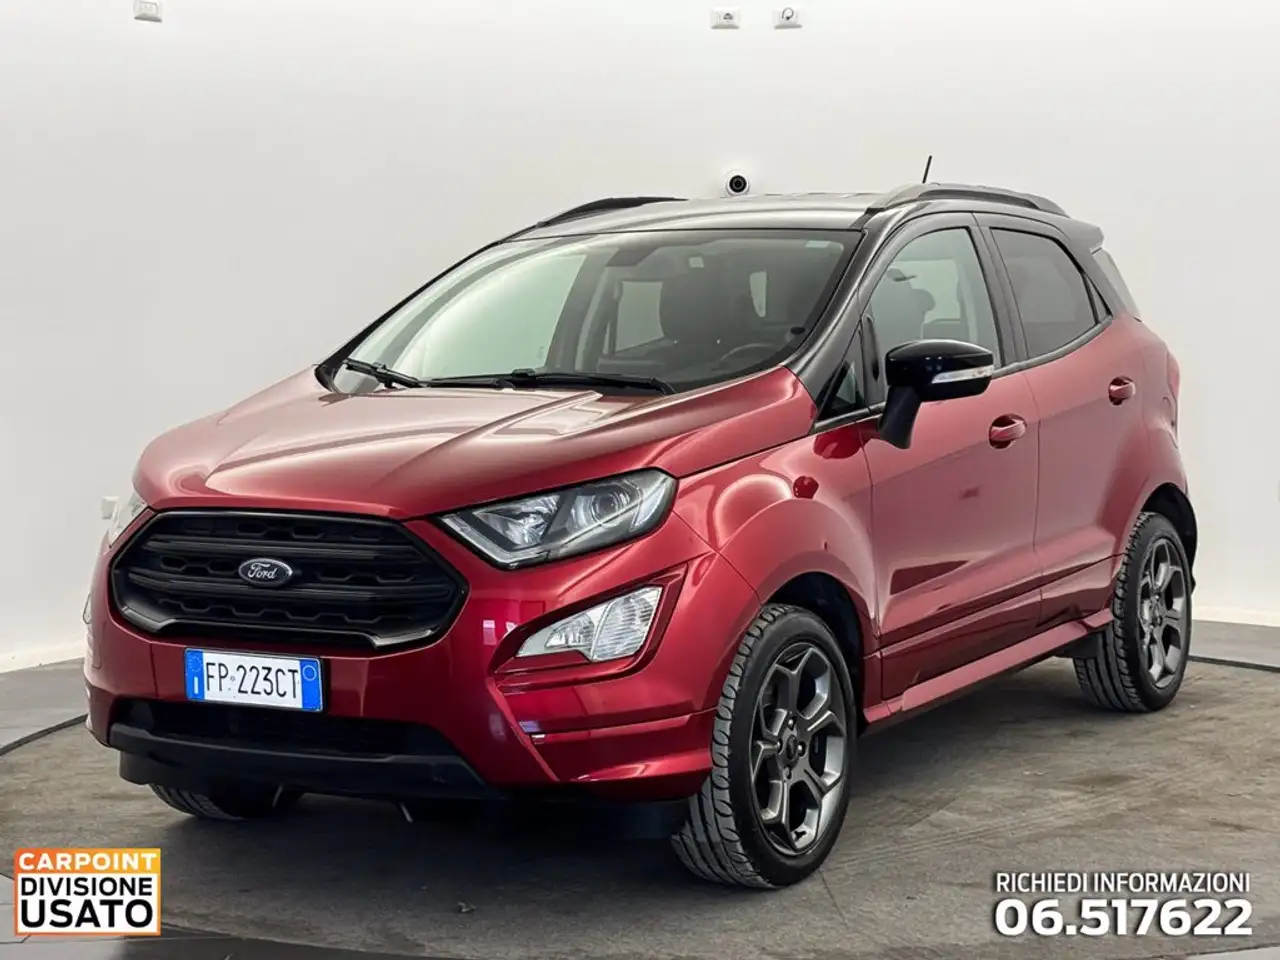 Ford EcoSport SUV/4x4/Pick-up in Rood tweedehands in Roma -RM voor € 12.320,-